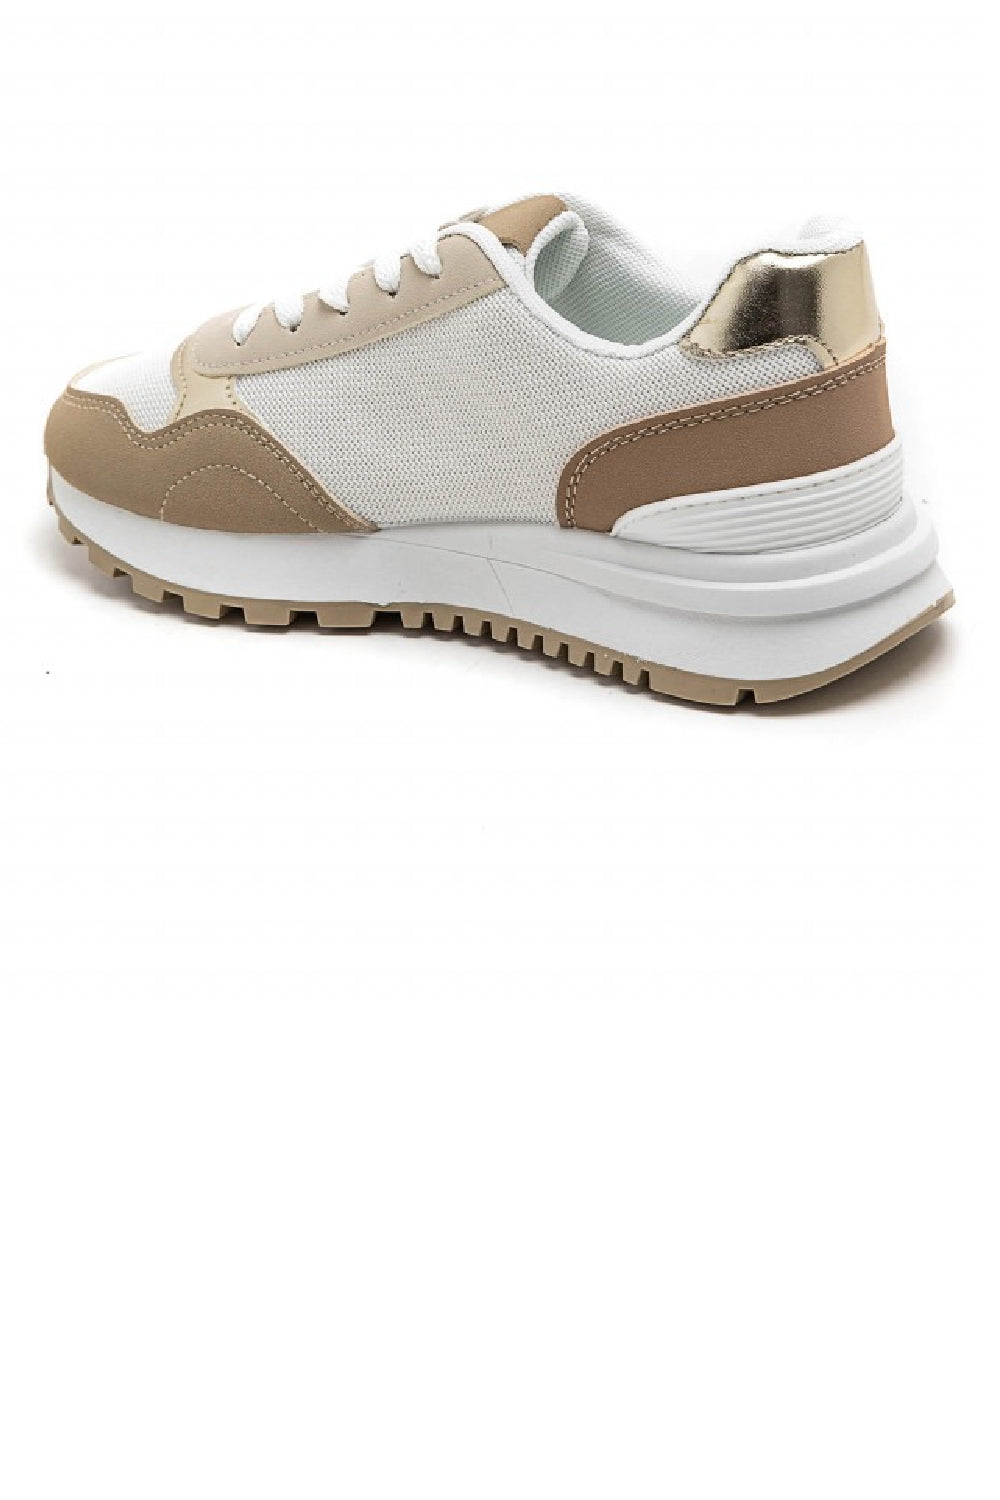 KHAKI FLAT LACE UP SIDE DETAIL SNEAKERS TRAINERS